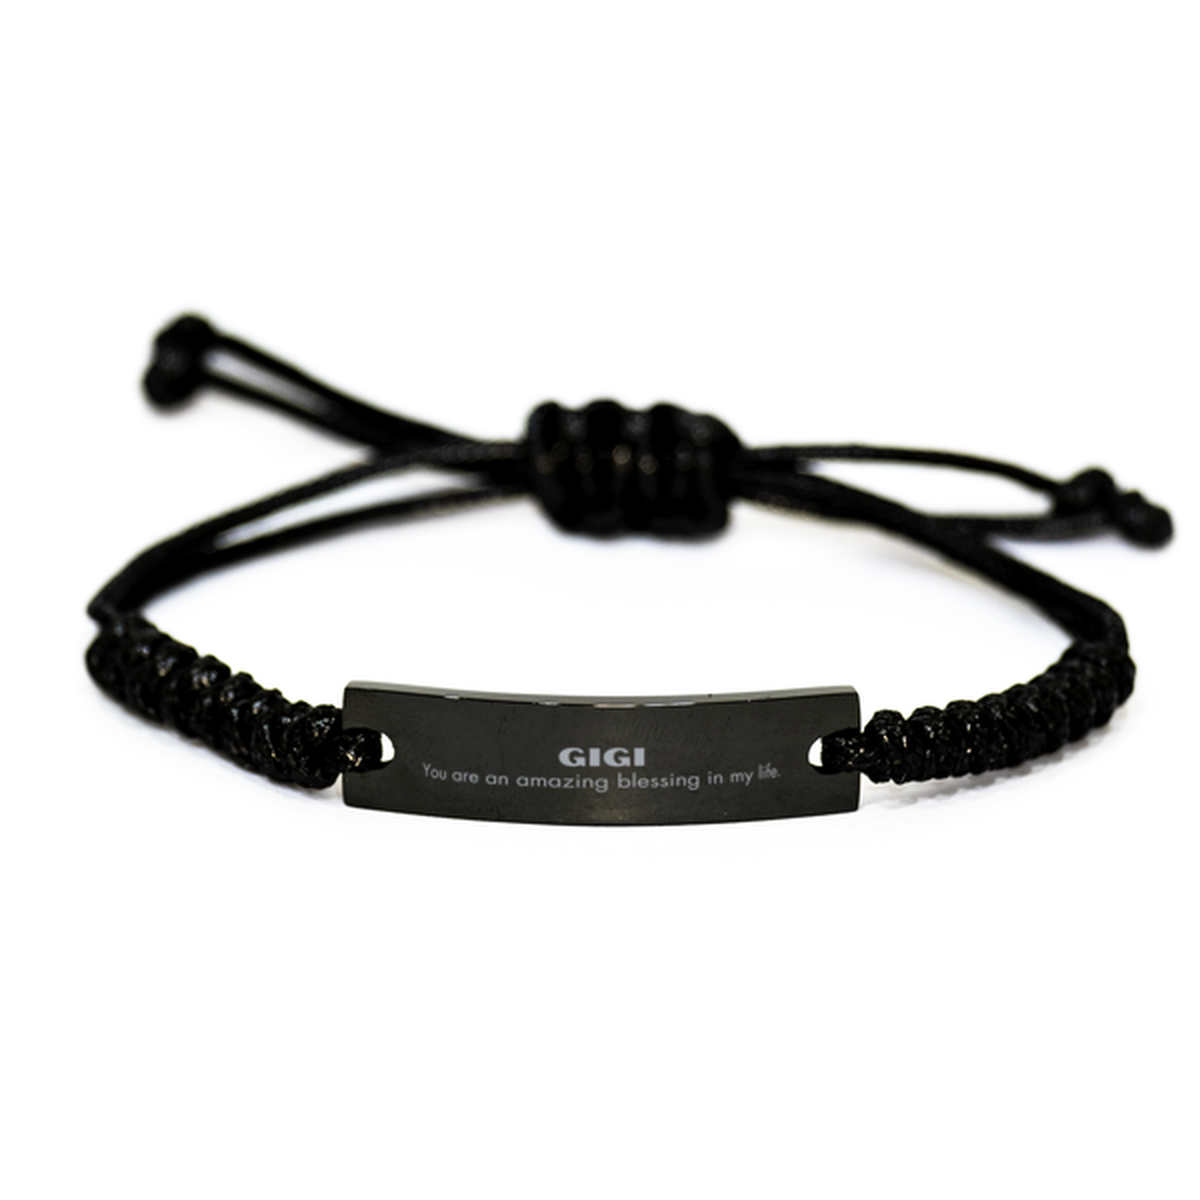 Gigi Black Rope Bracelet, You are an amazing blessing in my life, Thank You Gifts For Gigi, Inspirational Birthday Christmas Unique Gifts For Gigi